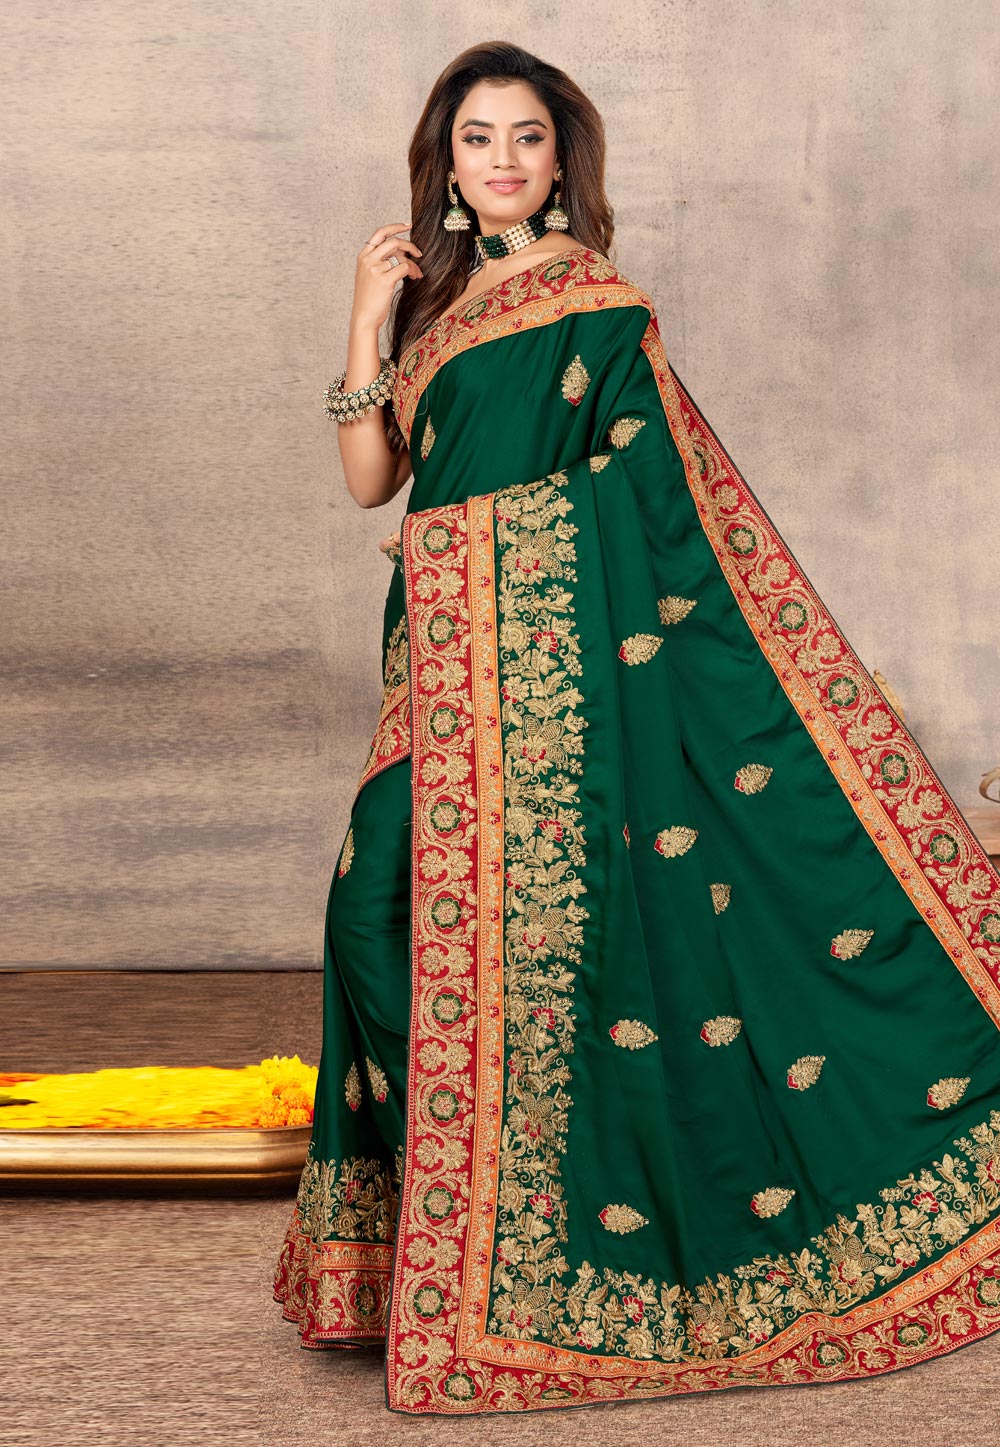 Green Satin Embroidered Saree With Blouse 217727